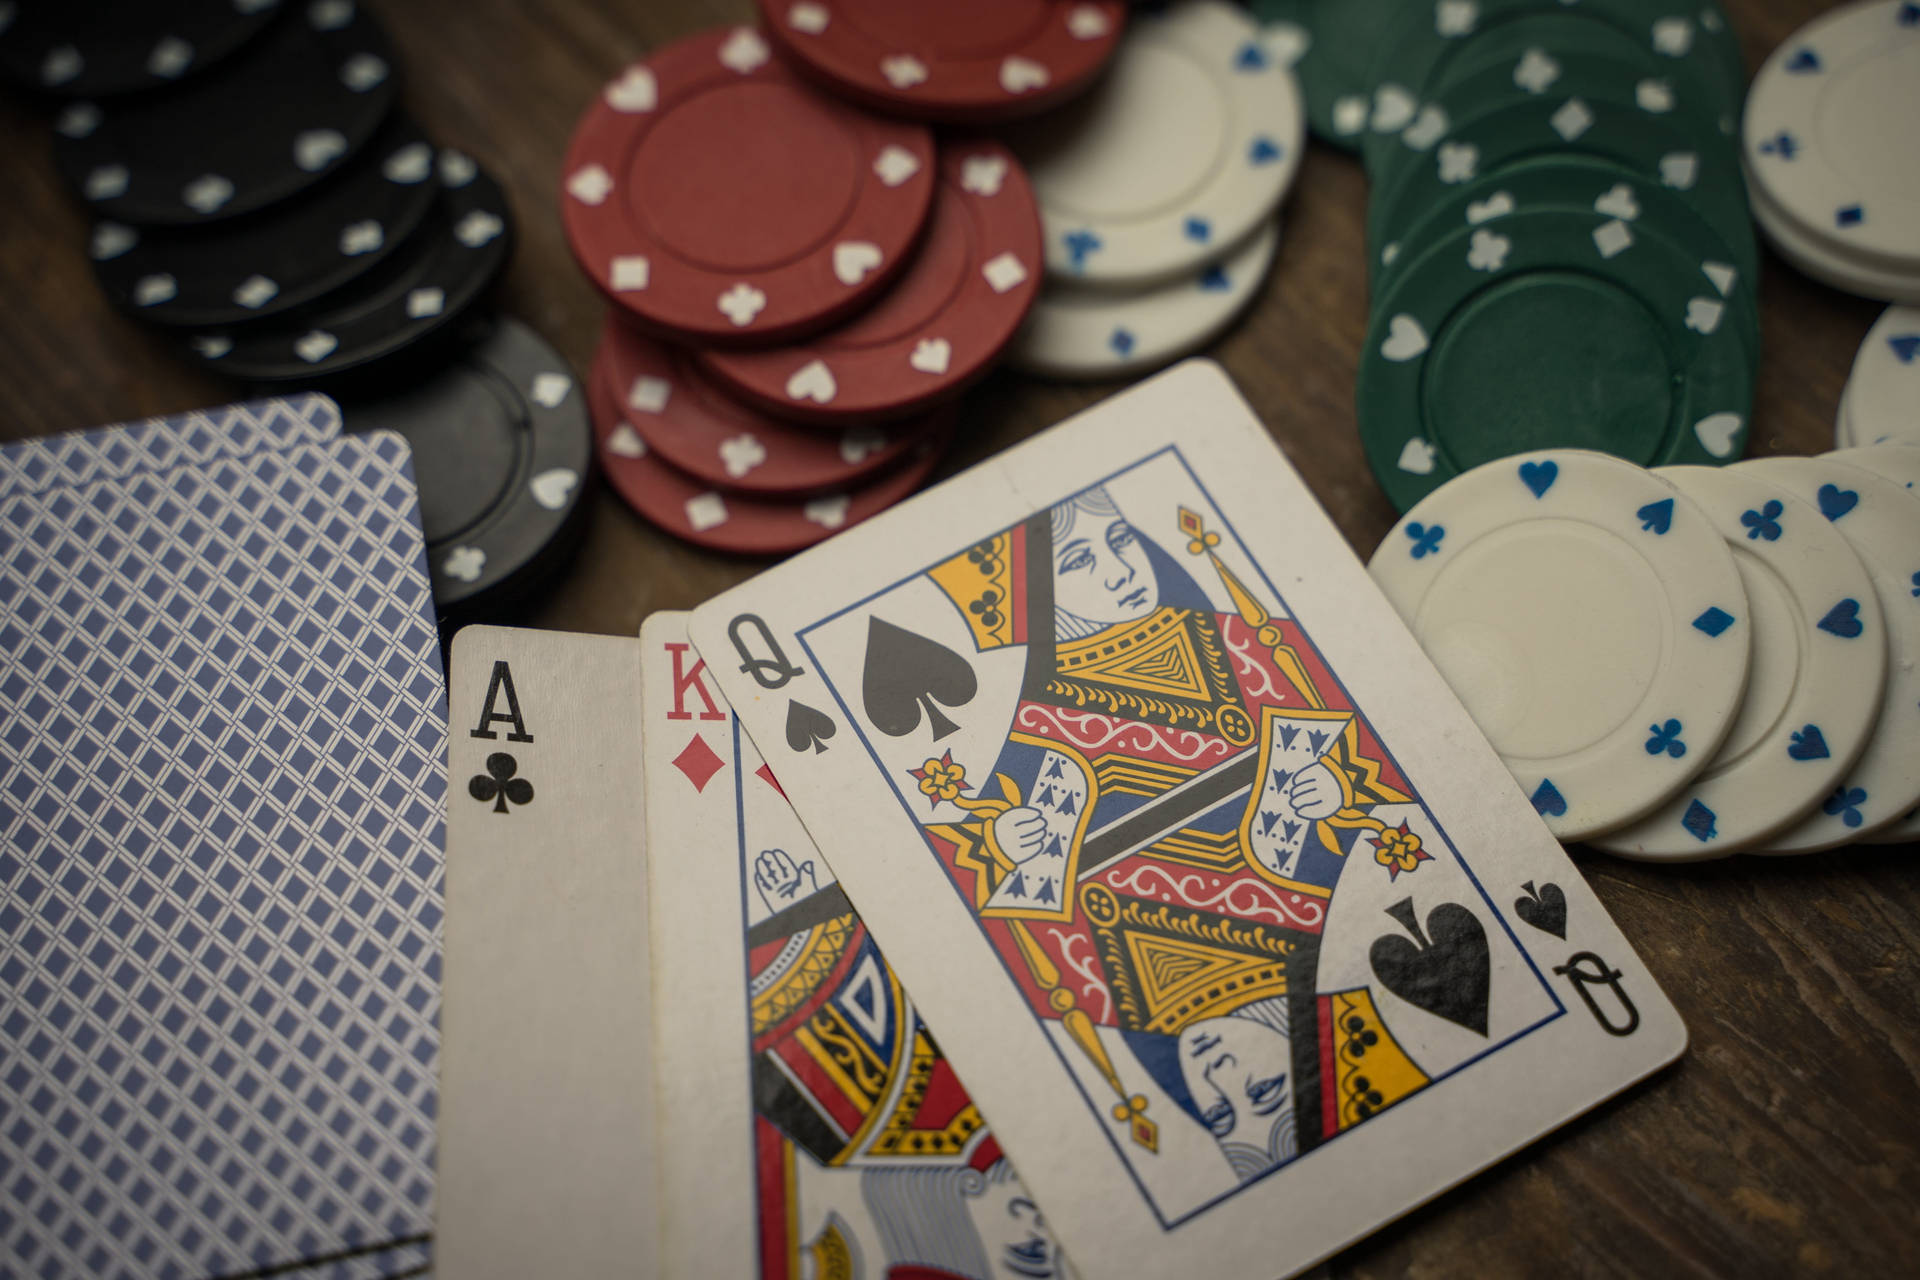 Captivating Game of Playing Cards Wallpaper